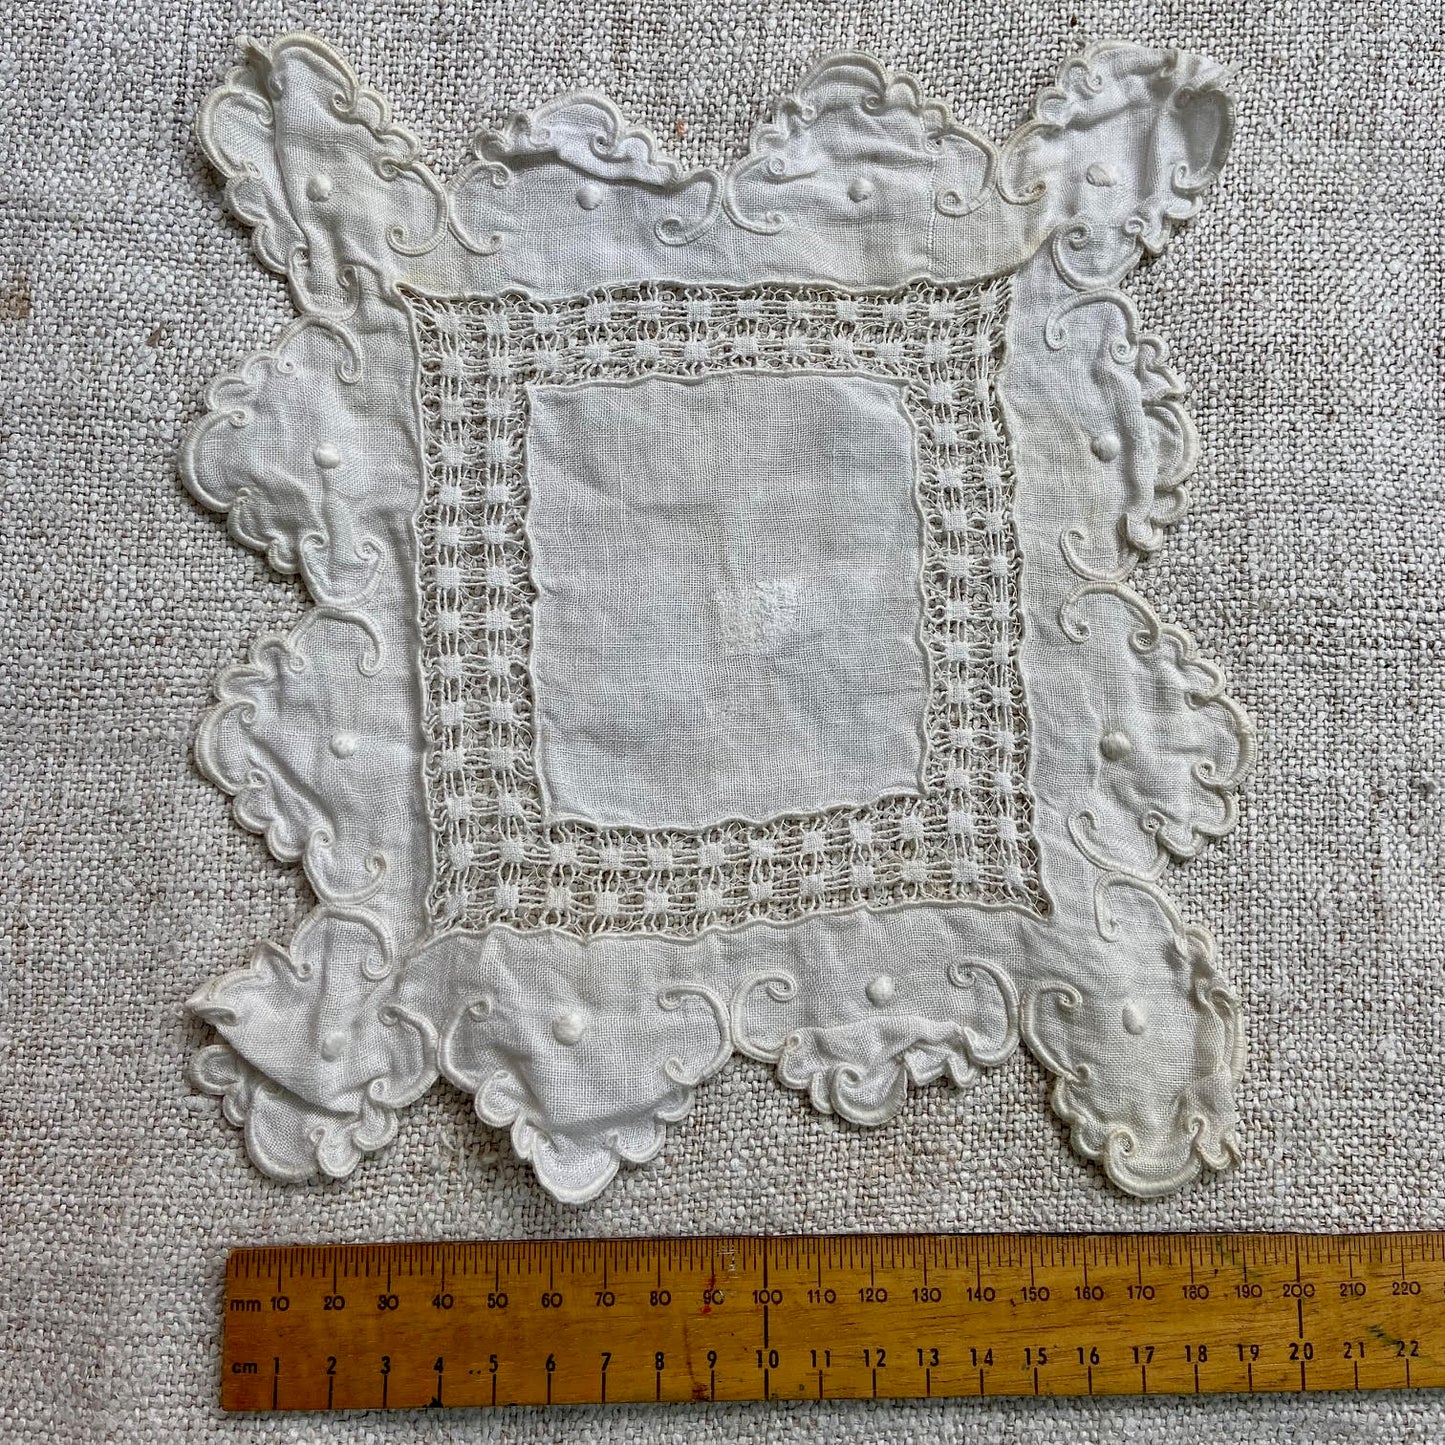 Mended Cotton Embroidery Work - Item 23531